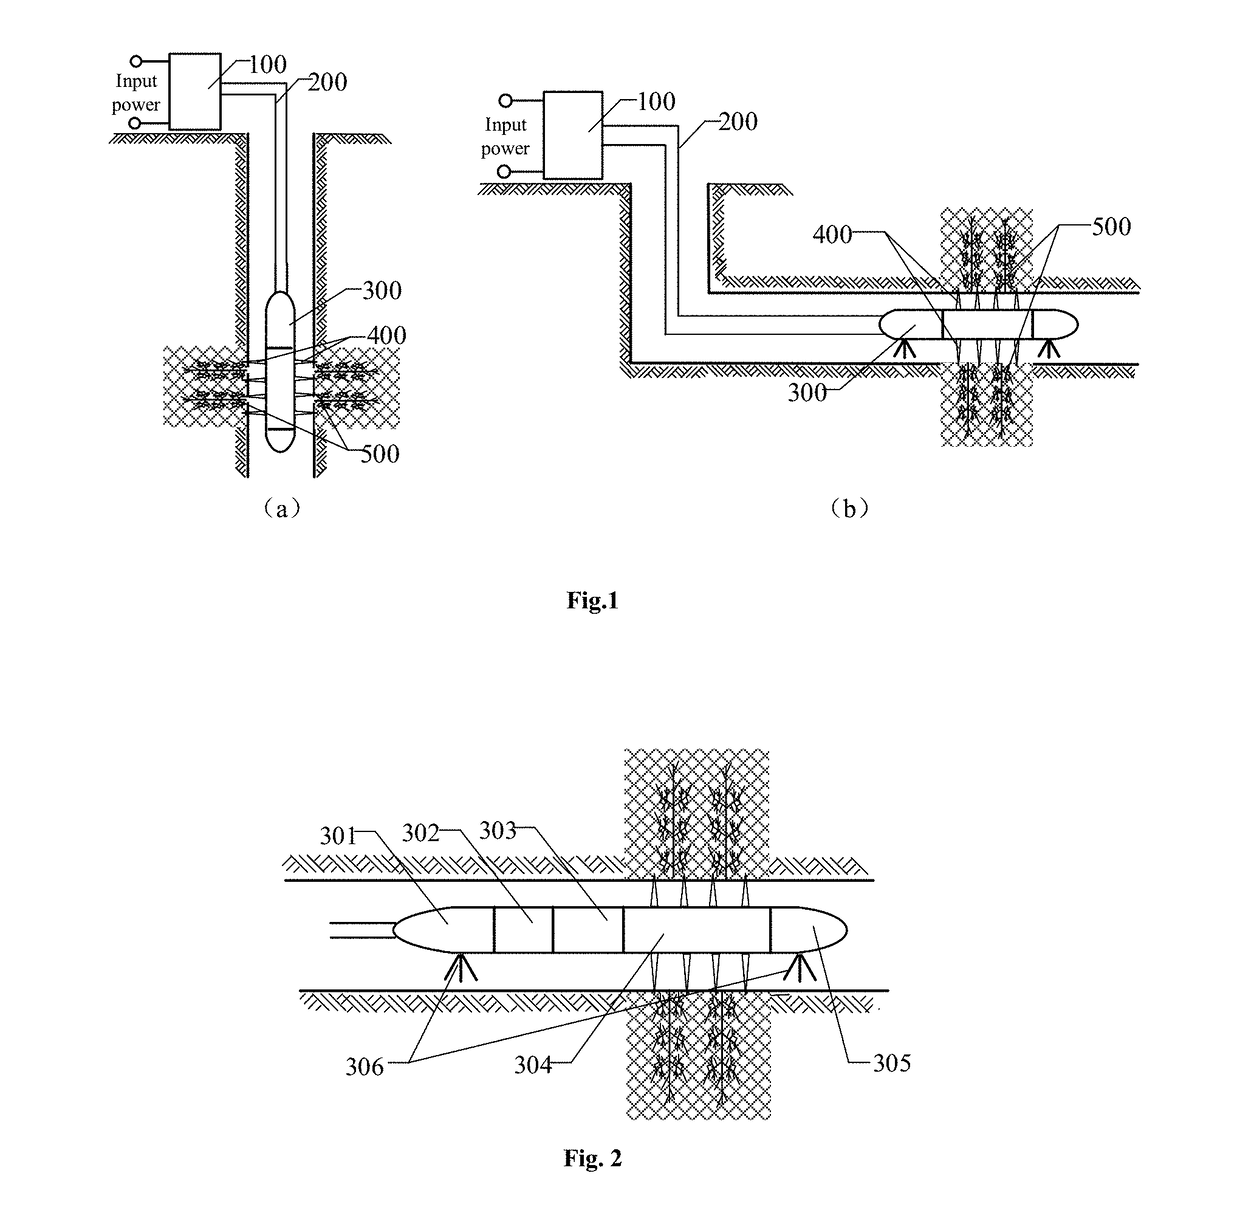 Pipeline descaling and rock stratum fracturing device based on electro-hydraulic pulse shock waves